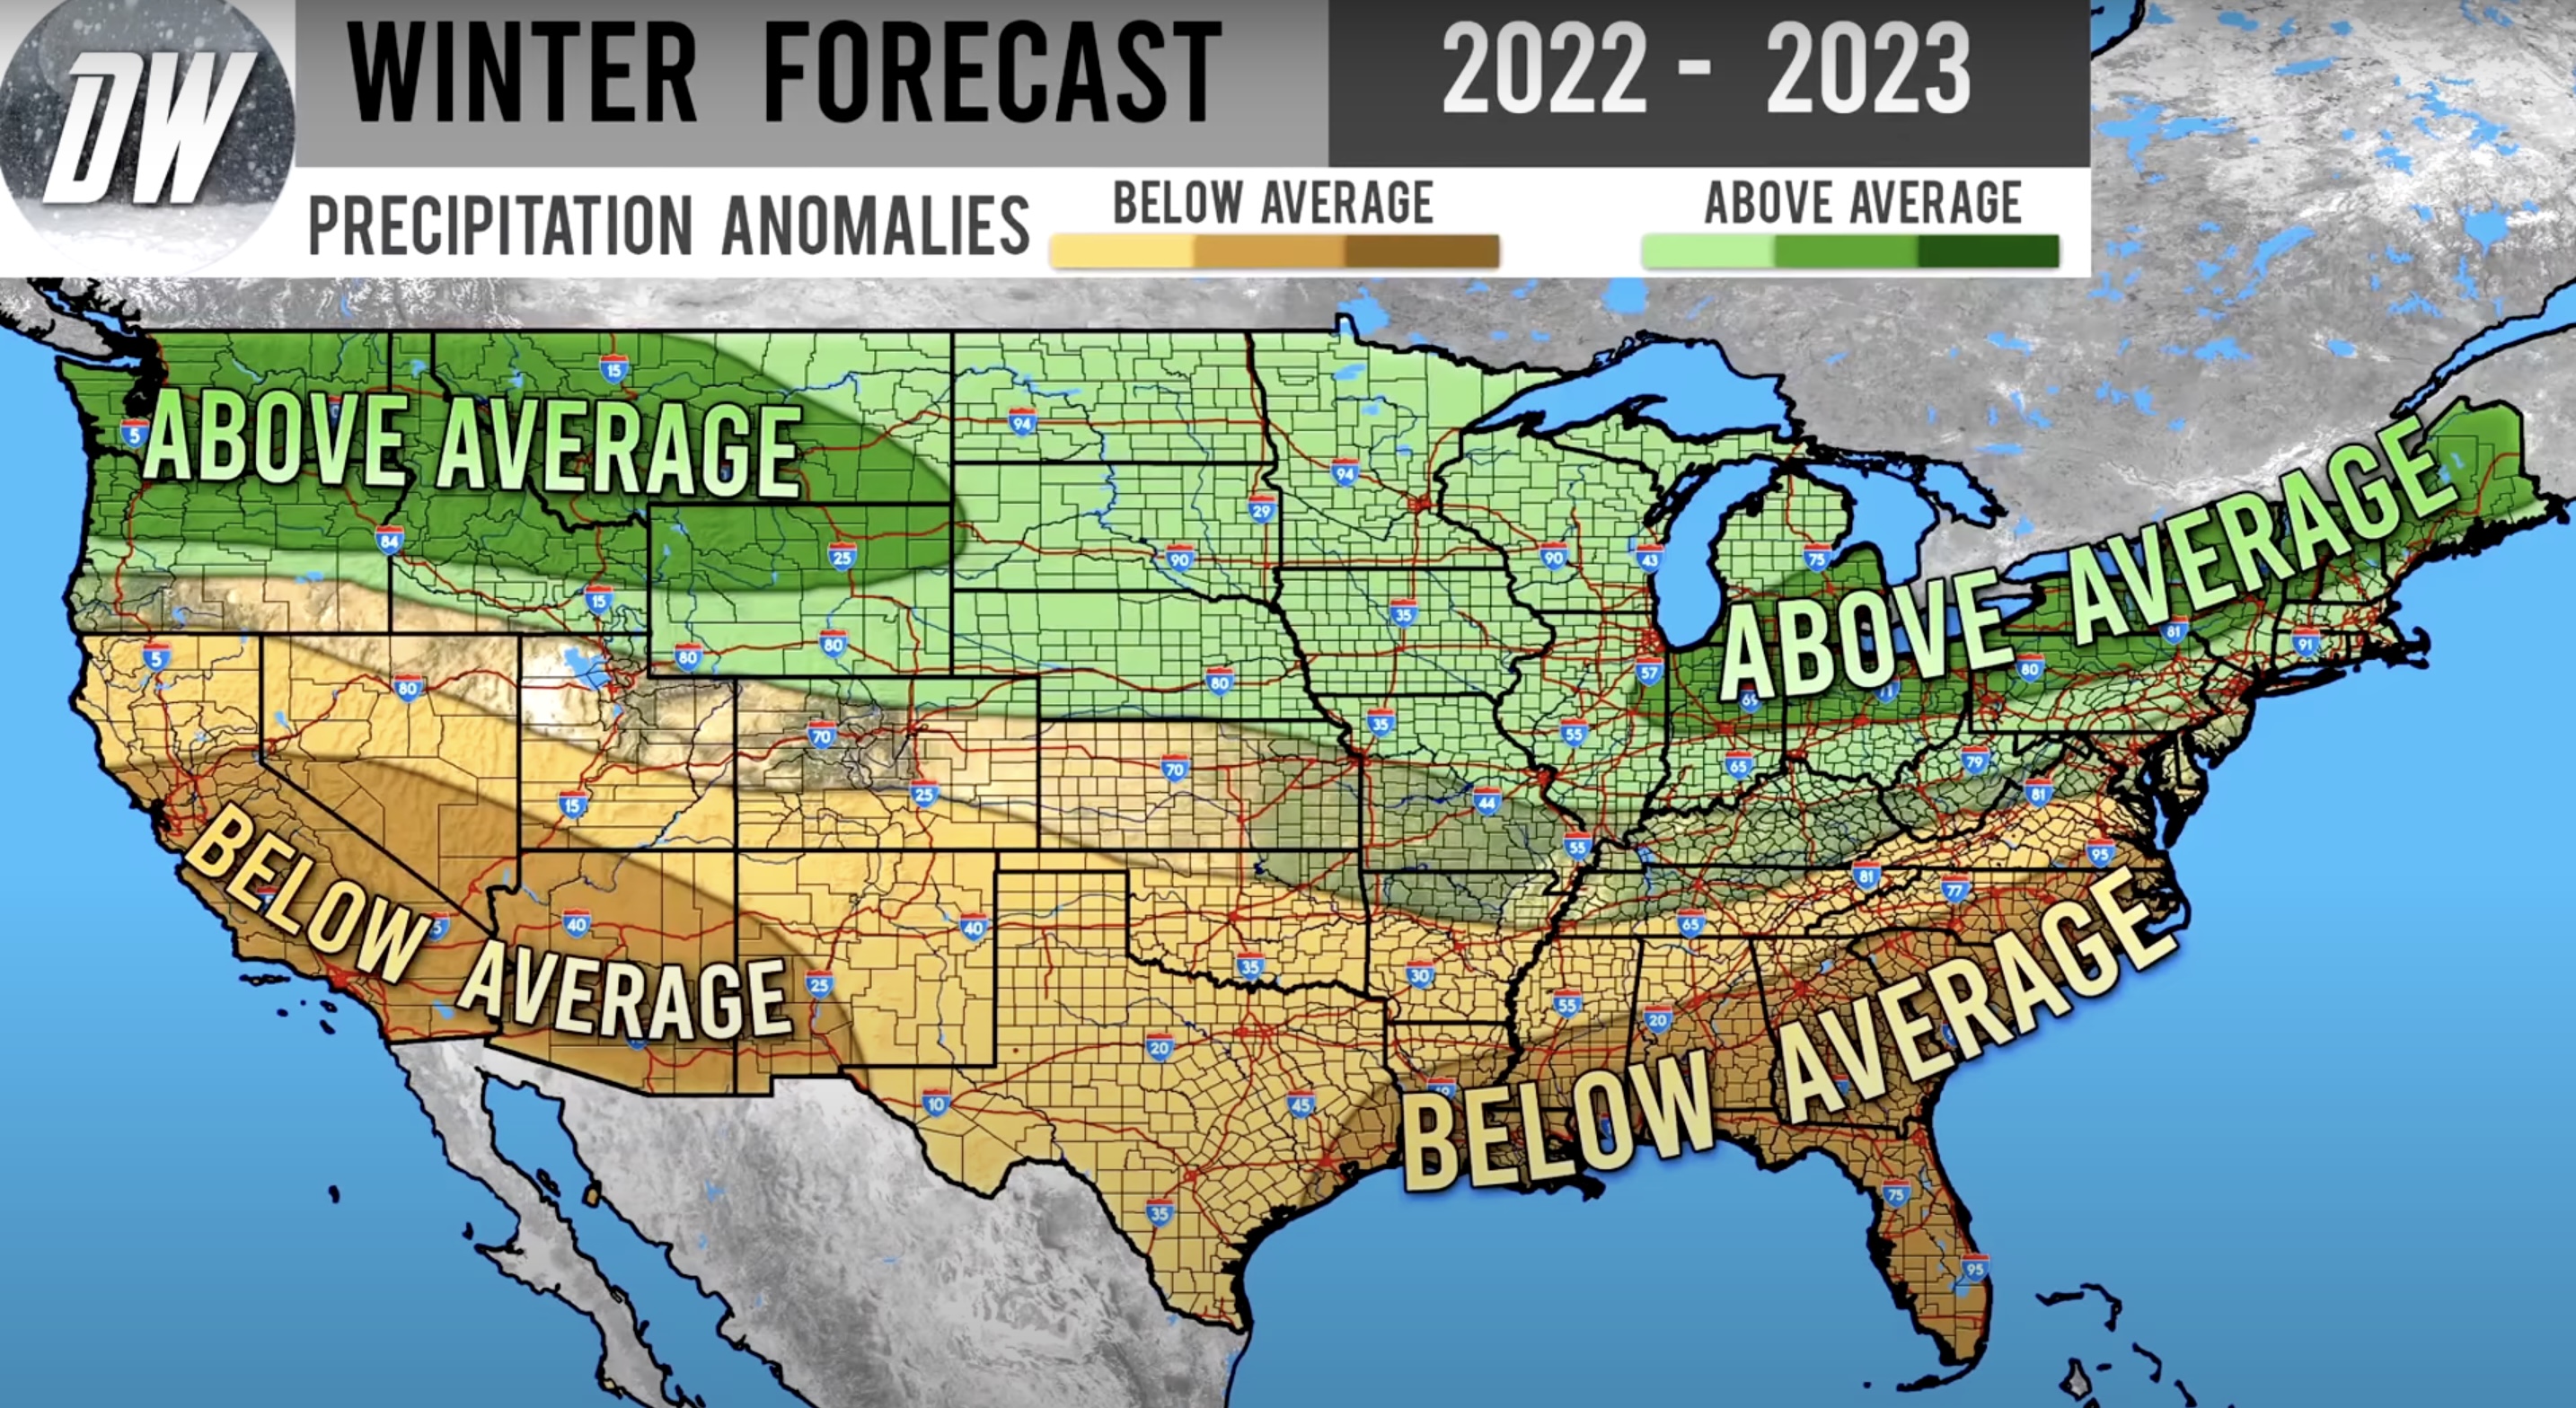 Winter Weather Forecast for 2022 2023 From Direct Weather